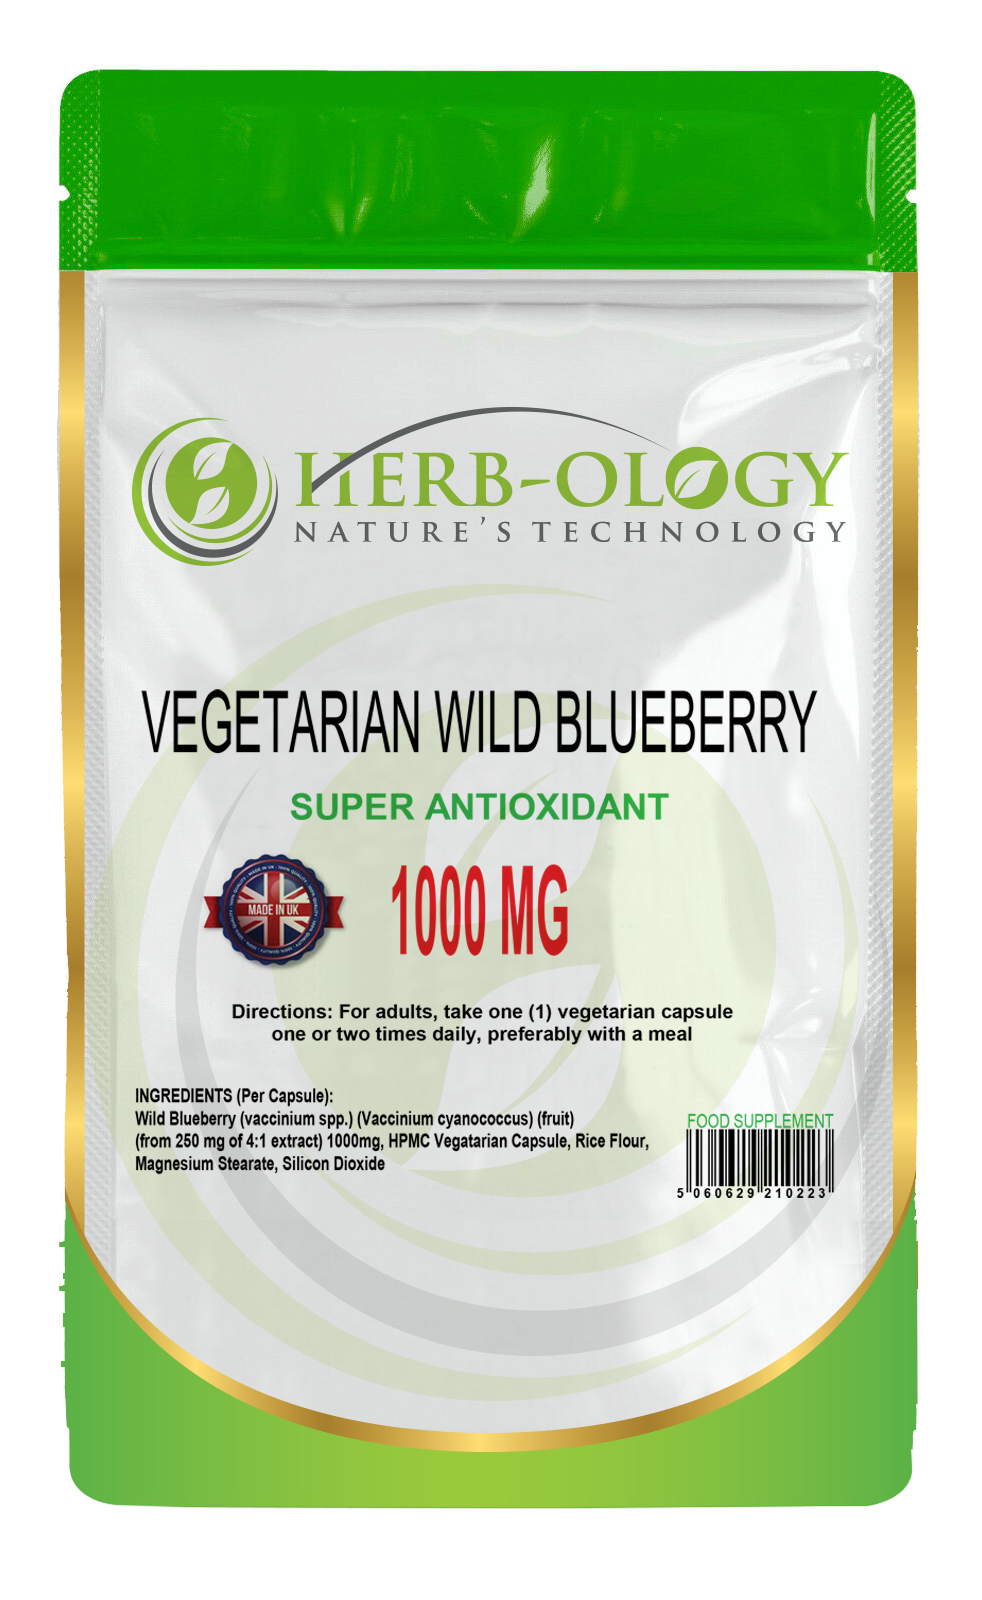 Wild Blueberry Eye Vitamins Capsules Supplement 1000mg Antioxidant Support